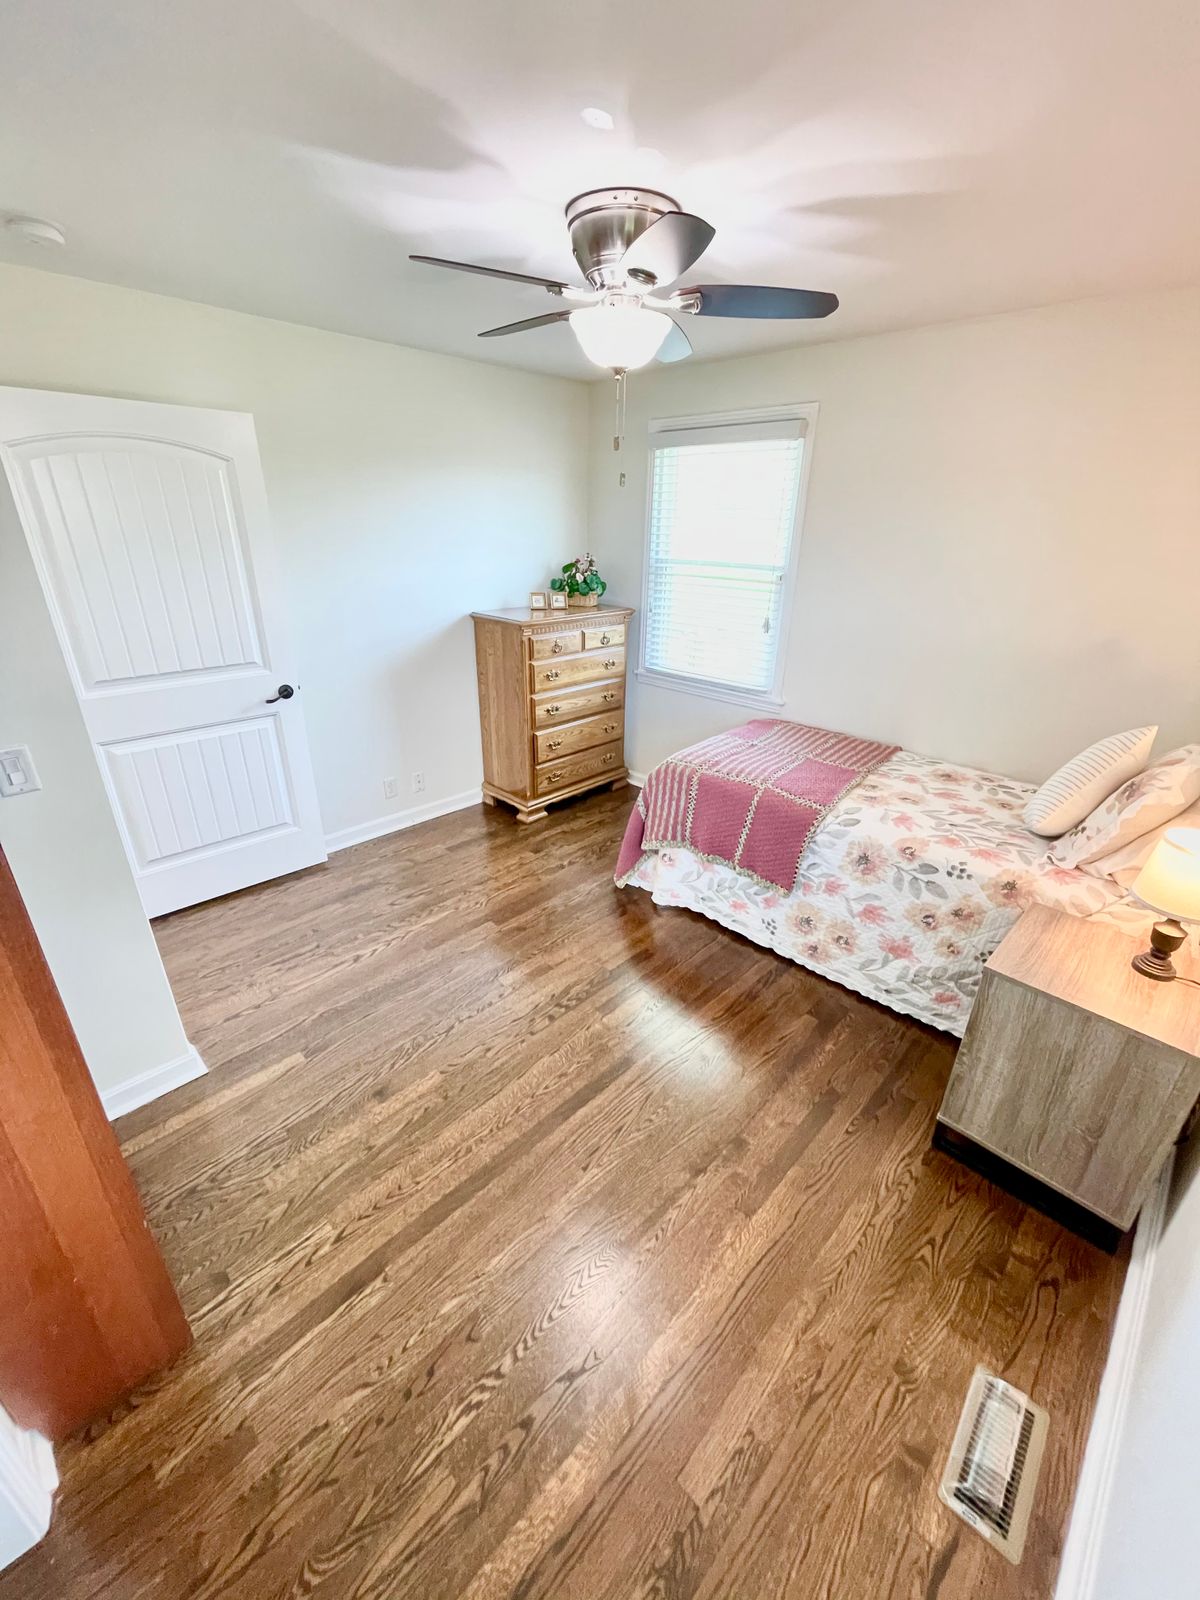 Interior view of Silver Lining Home and Care with hardwood flooring, ceiling fan, and bed.